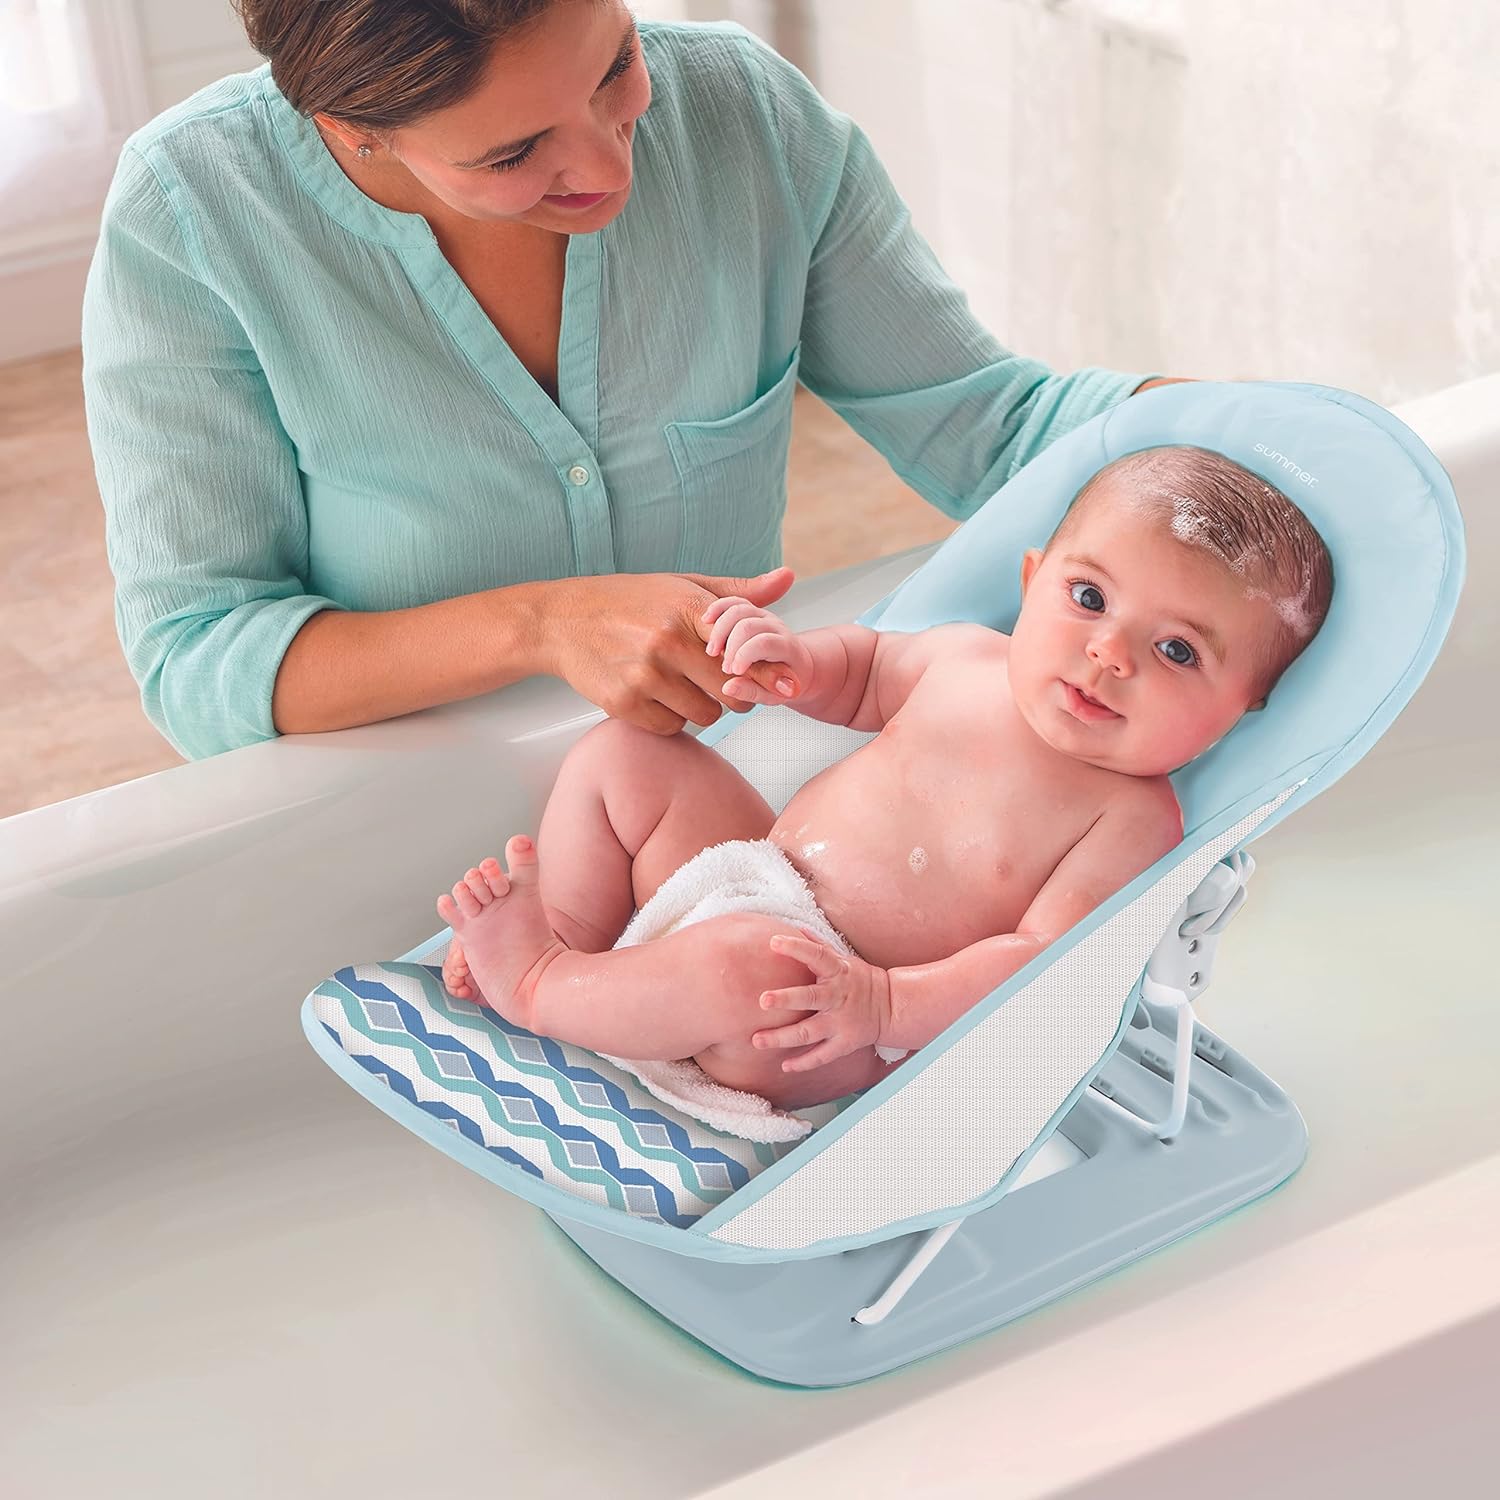 Summer Infant Deluxe Baby Bather With Warming Wings (Green Triangle) - Bath Support for Use in the Sink or Adult Tub